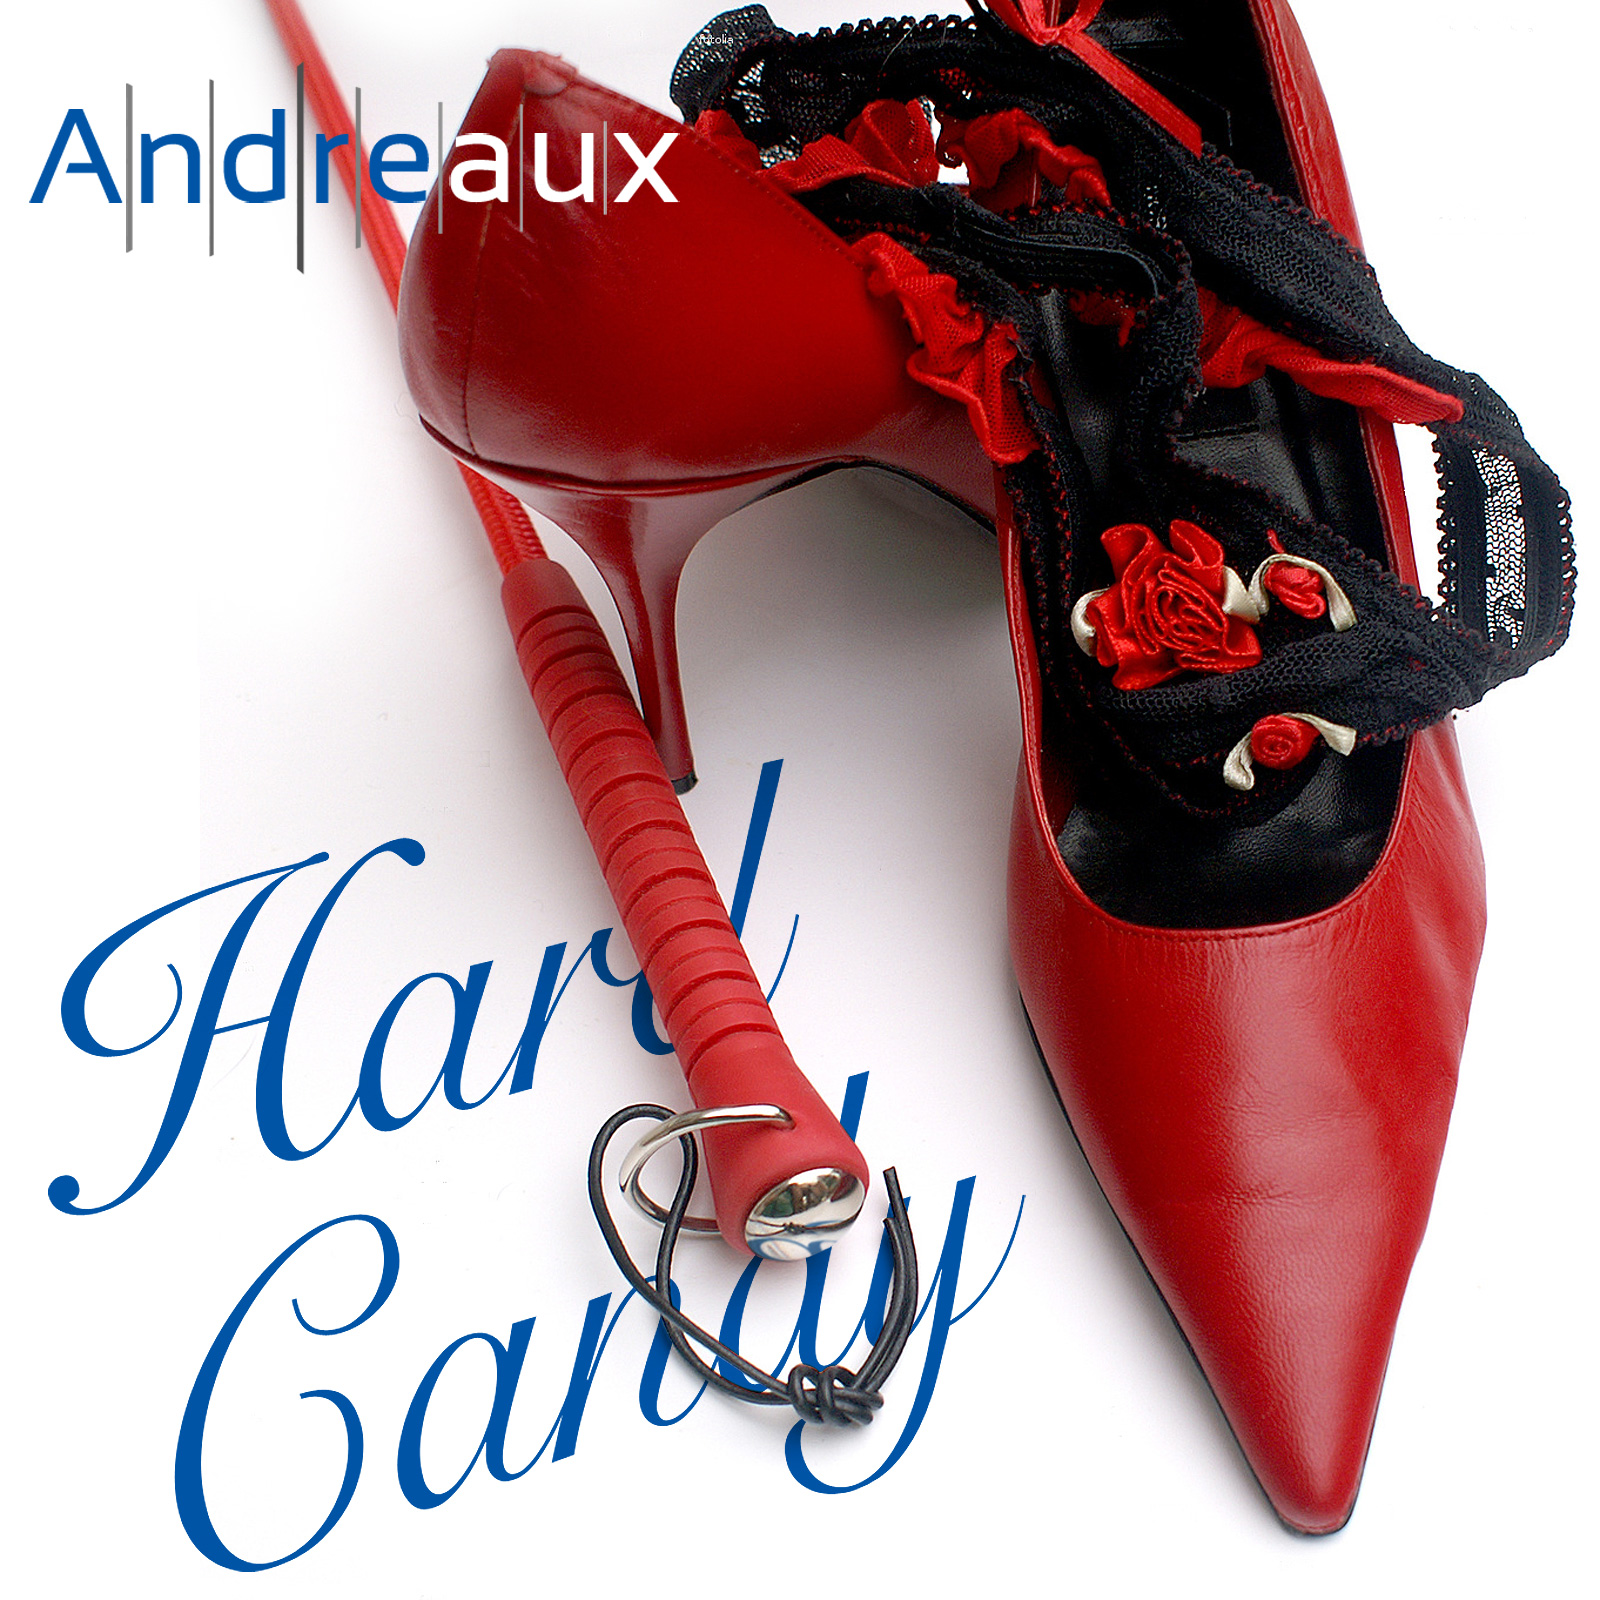 Andreaux just released the Extended Club version of Hard Candy. Be sure to visit your favourite online music platform and have a hear at this remastered and extended version of Hard Candy.